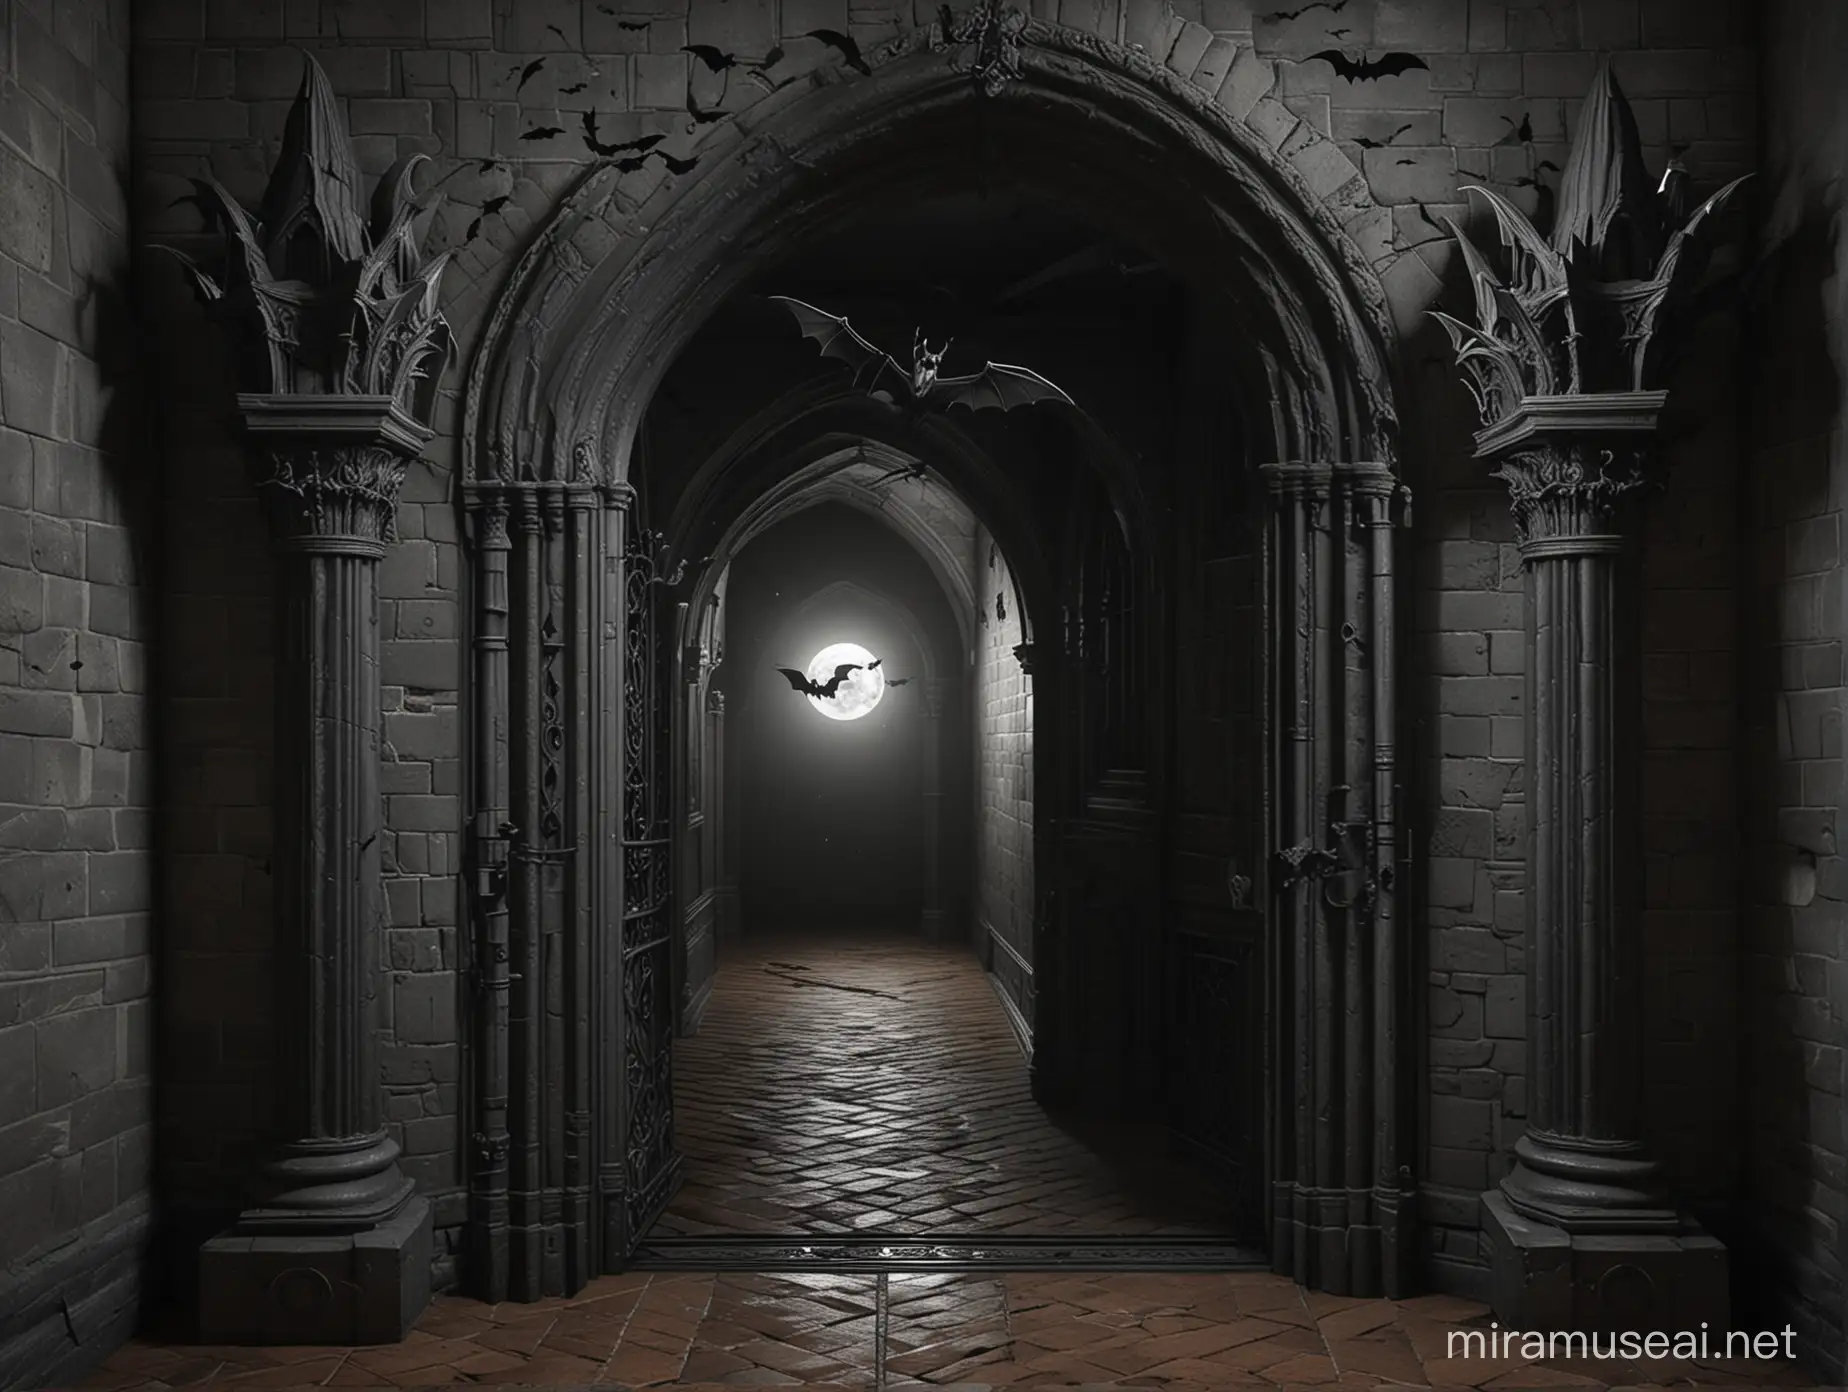 Endless Gothic Castle Doorway at Night with Bats